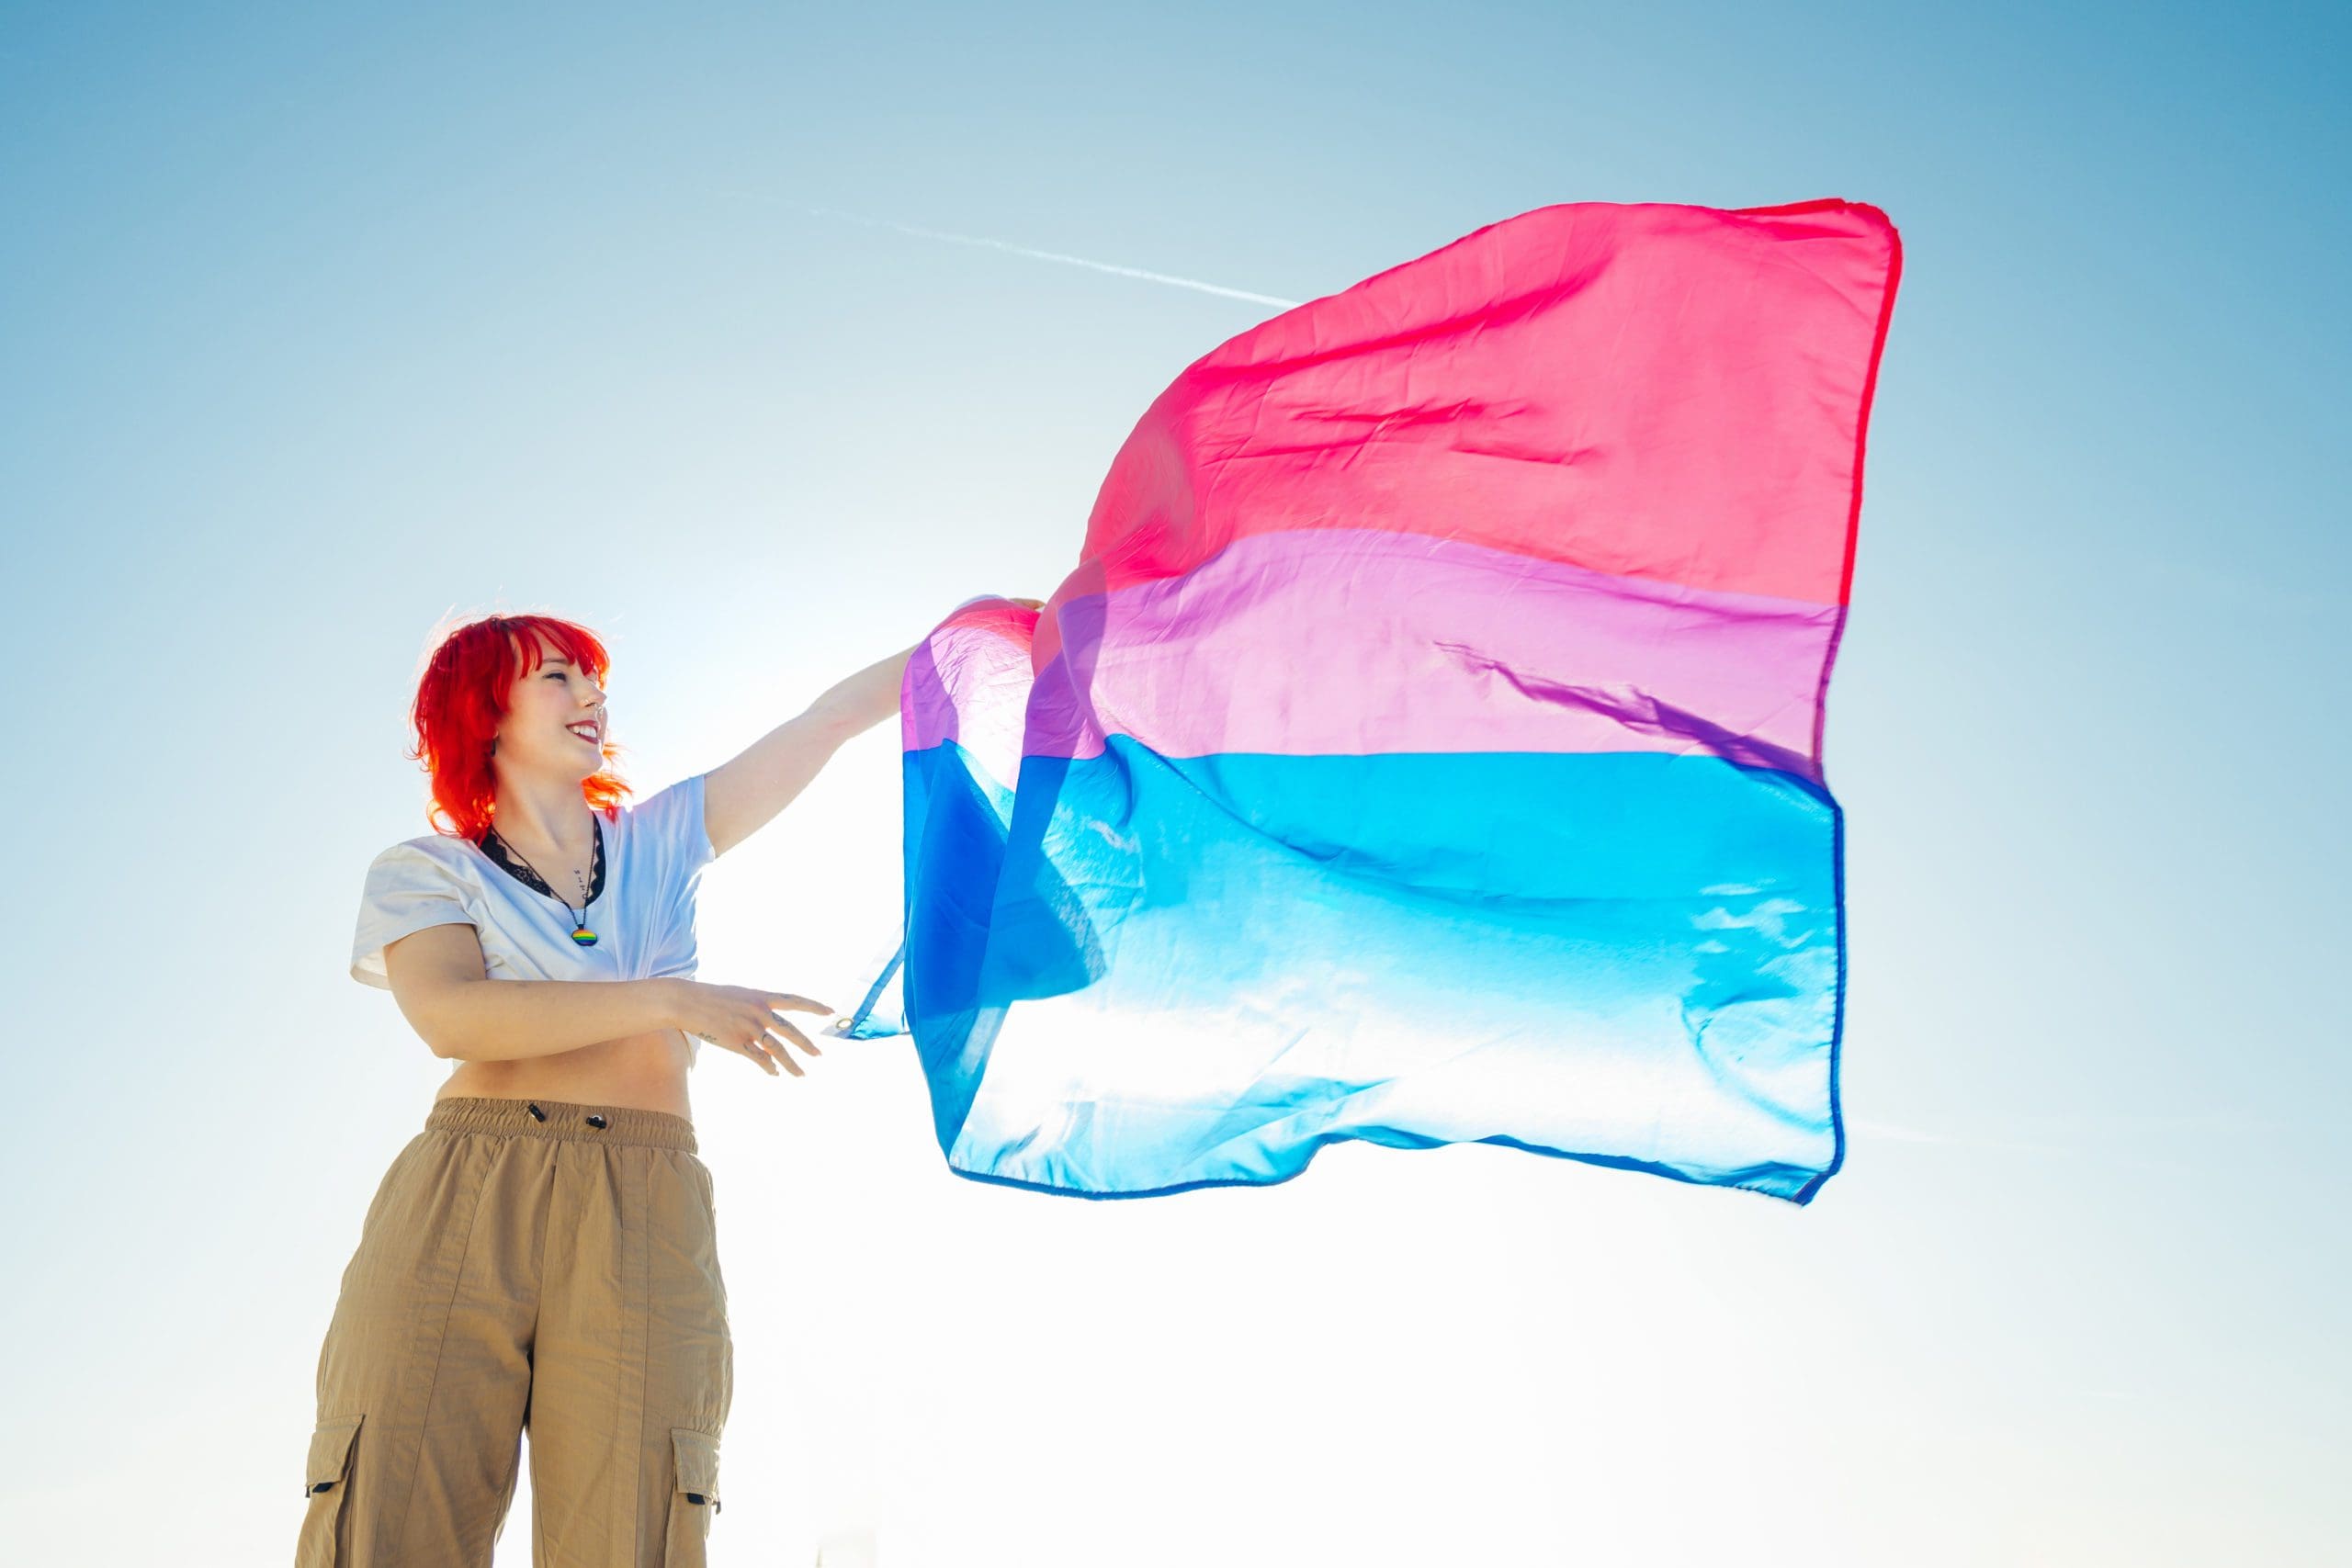 Young woman with red hair waving a colorful flag